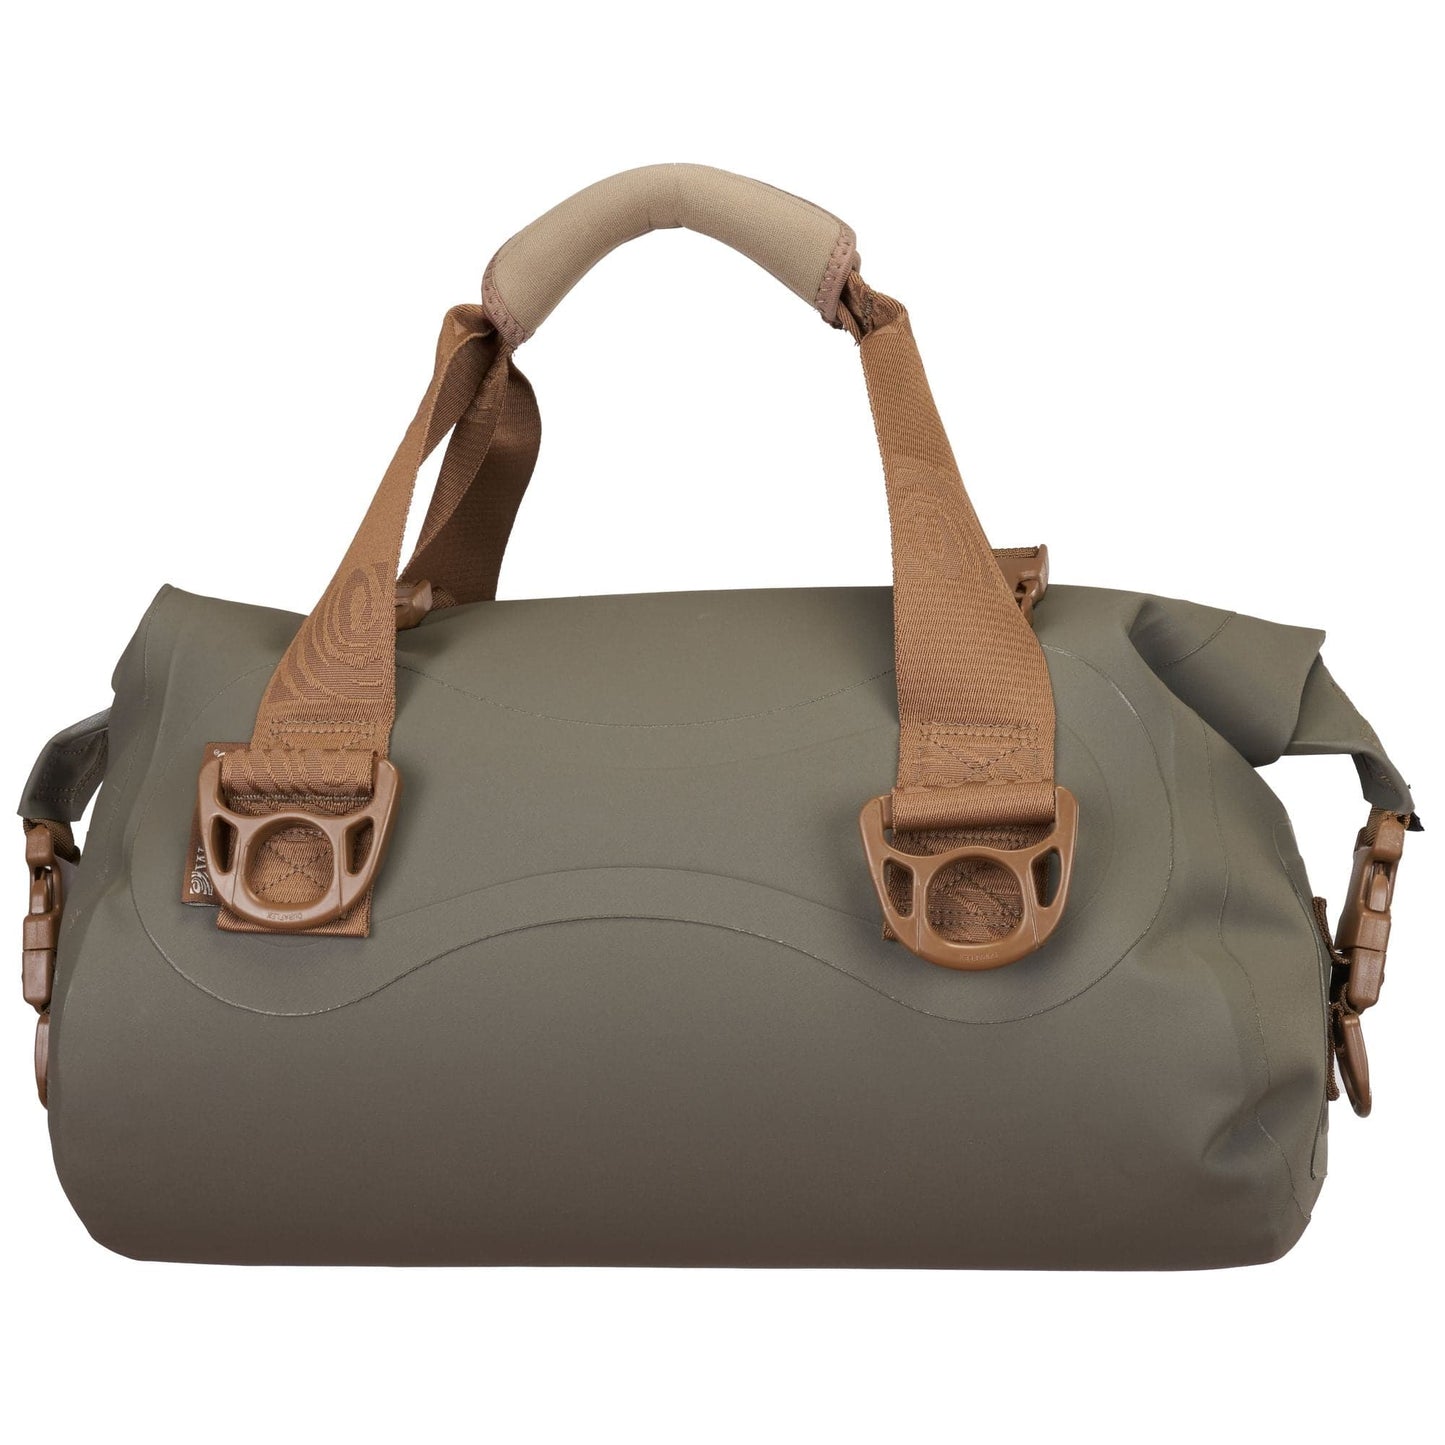 Featuring the Ocoee Duffel dry bag, gift for kayaker manufactured by Watershed shown here from one angle.